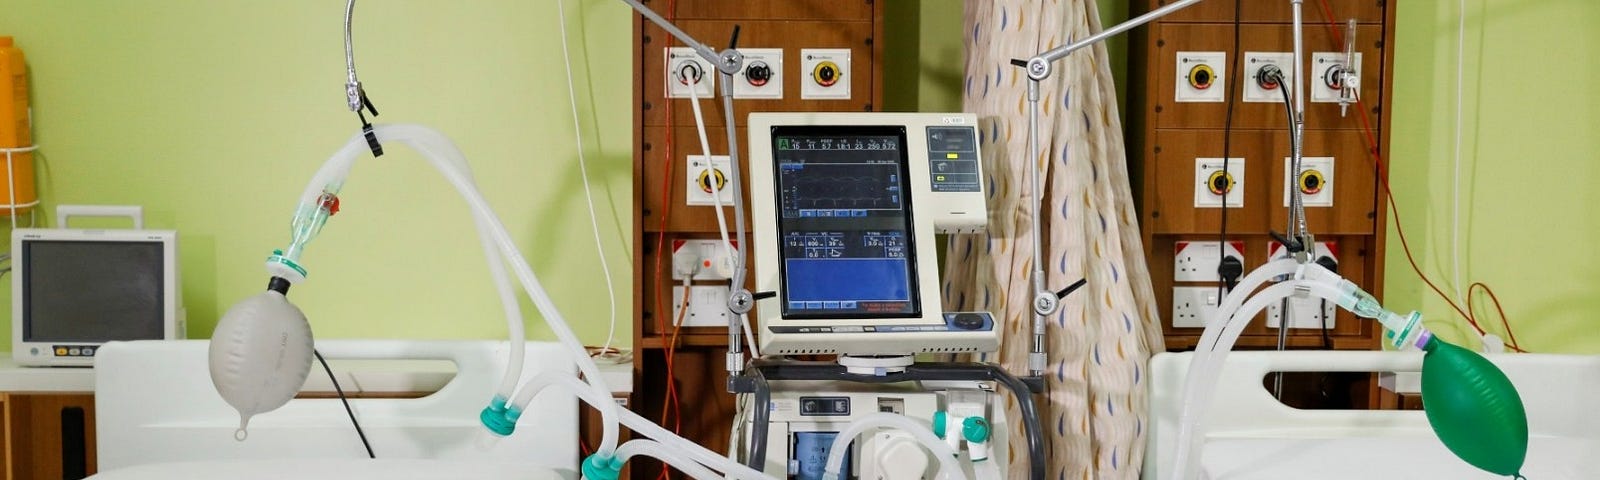 A ventilator modified to be used with two patients in Nairobi, Kenya, April 9, 2020. Photo by Baz Ratner/Reuters